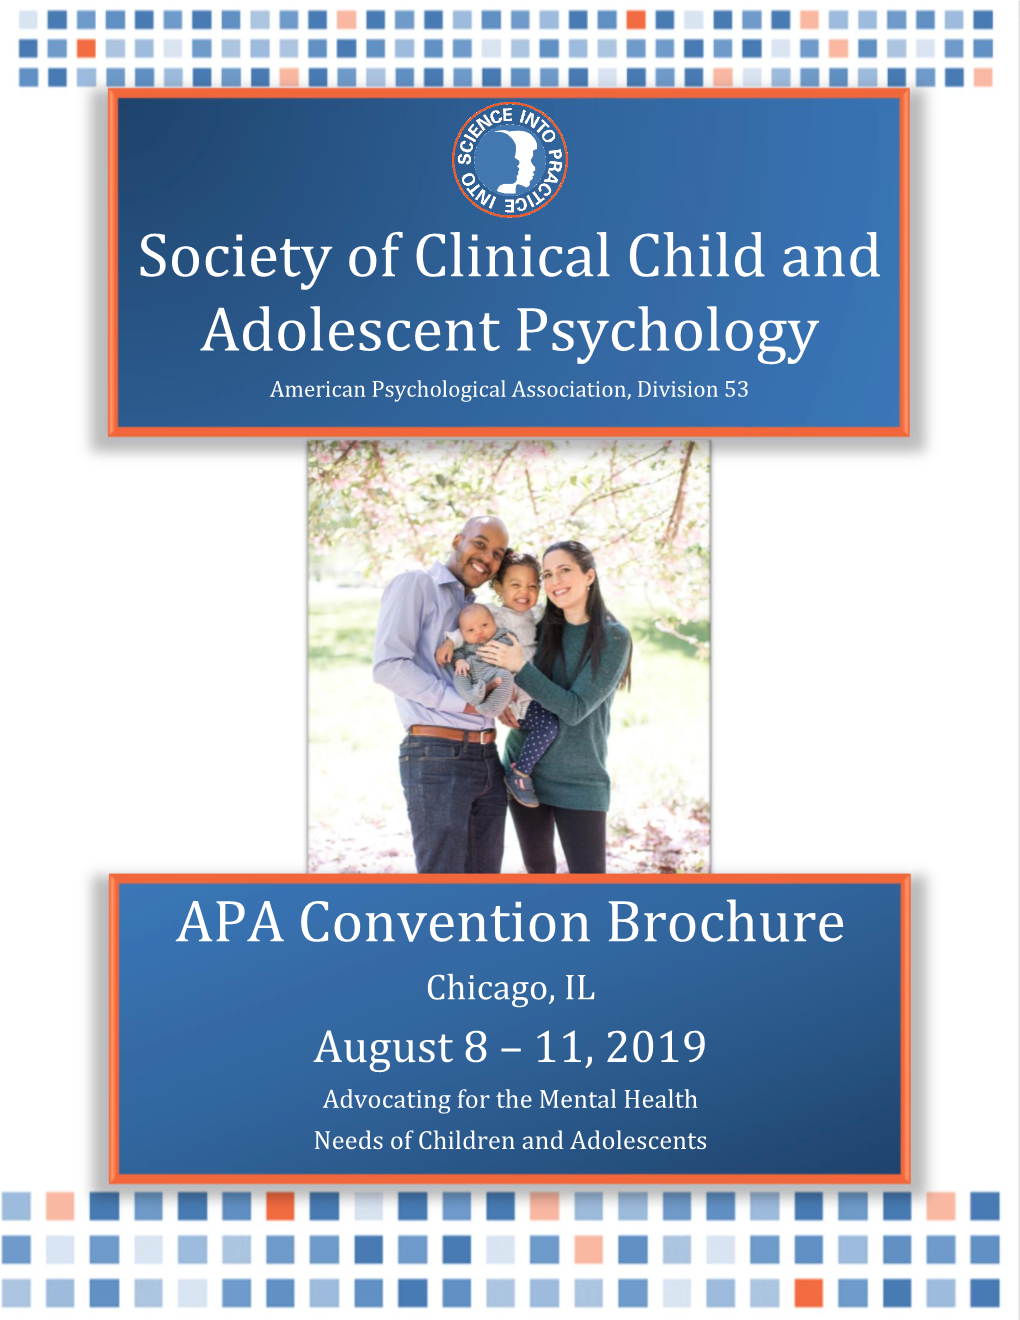 APA Convention Brochure Chicago, IL August 8 – 11, 2019 Advocating for the Mental Health Needs of Children and Adolescents